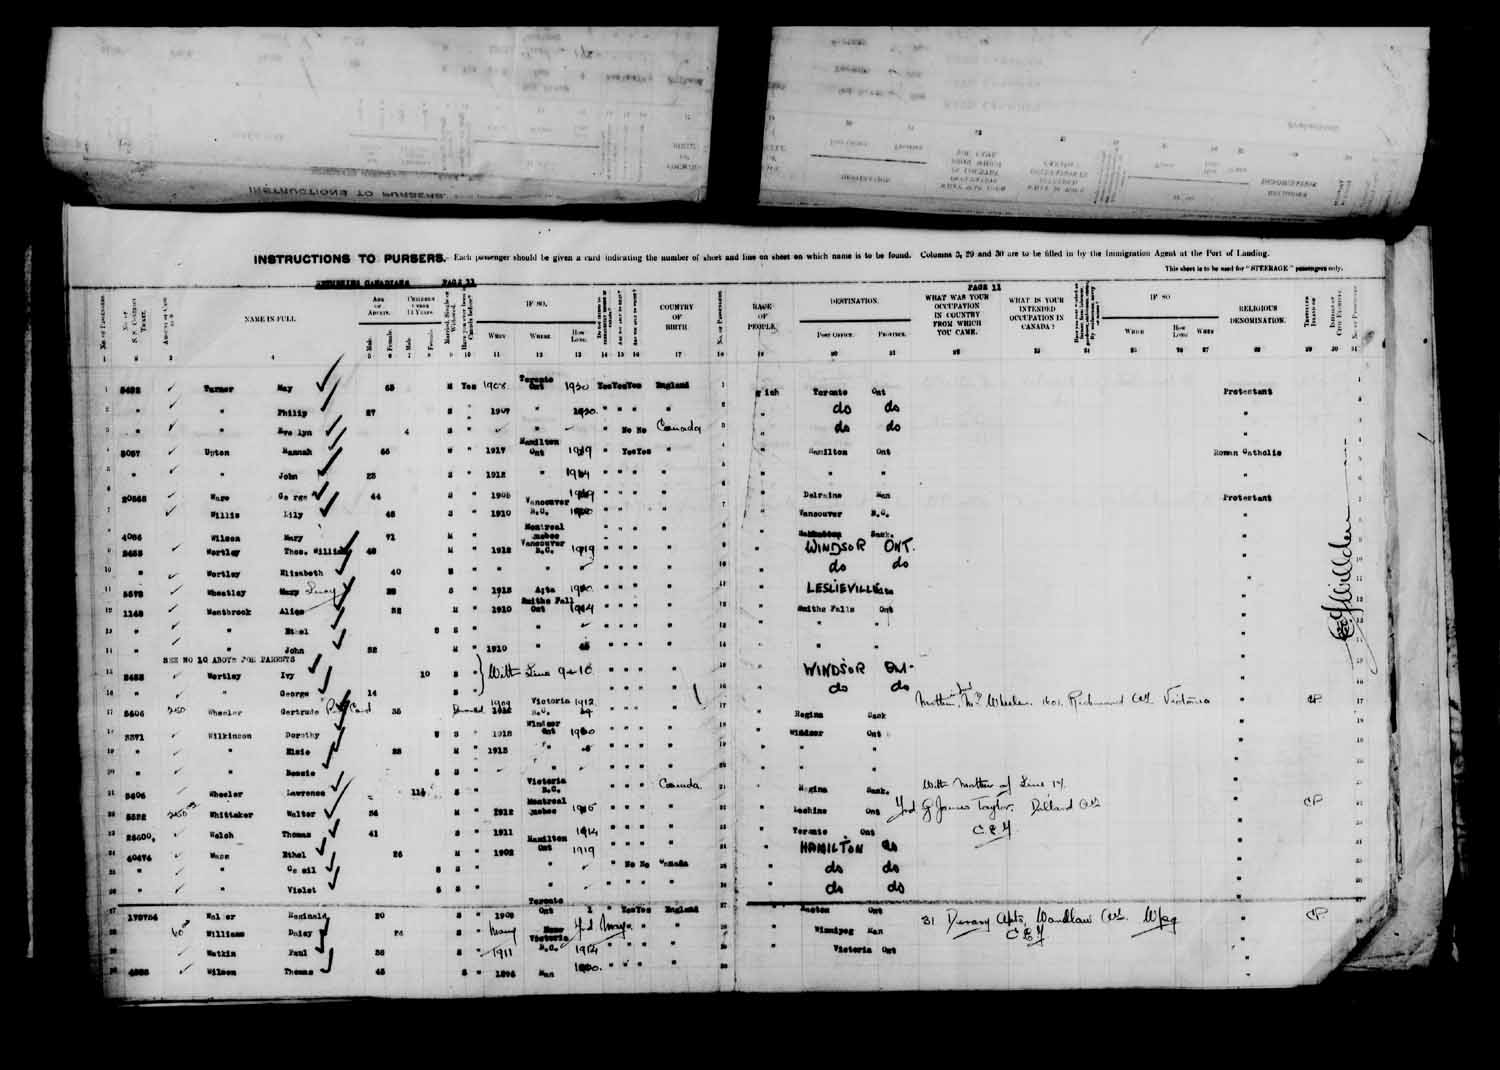 Digitized page of Passenger Lists for Image No.: e003610638